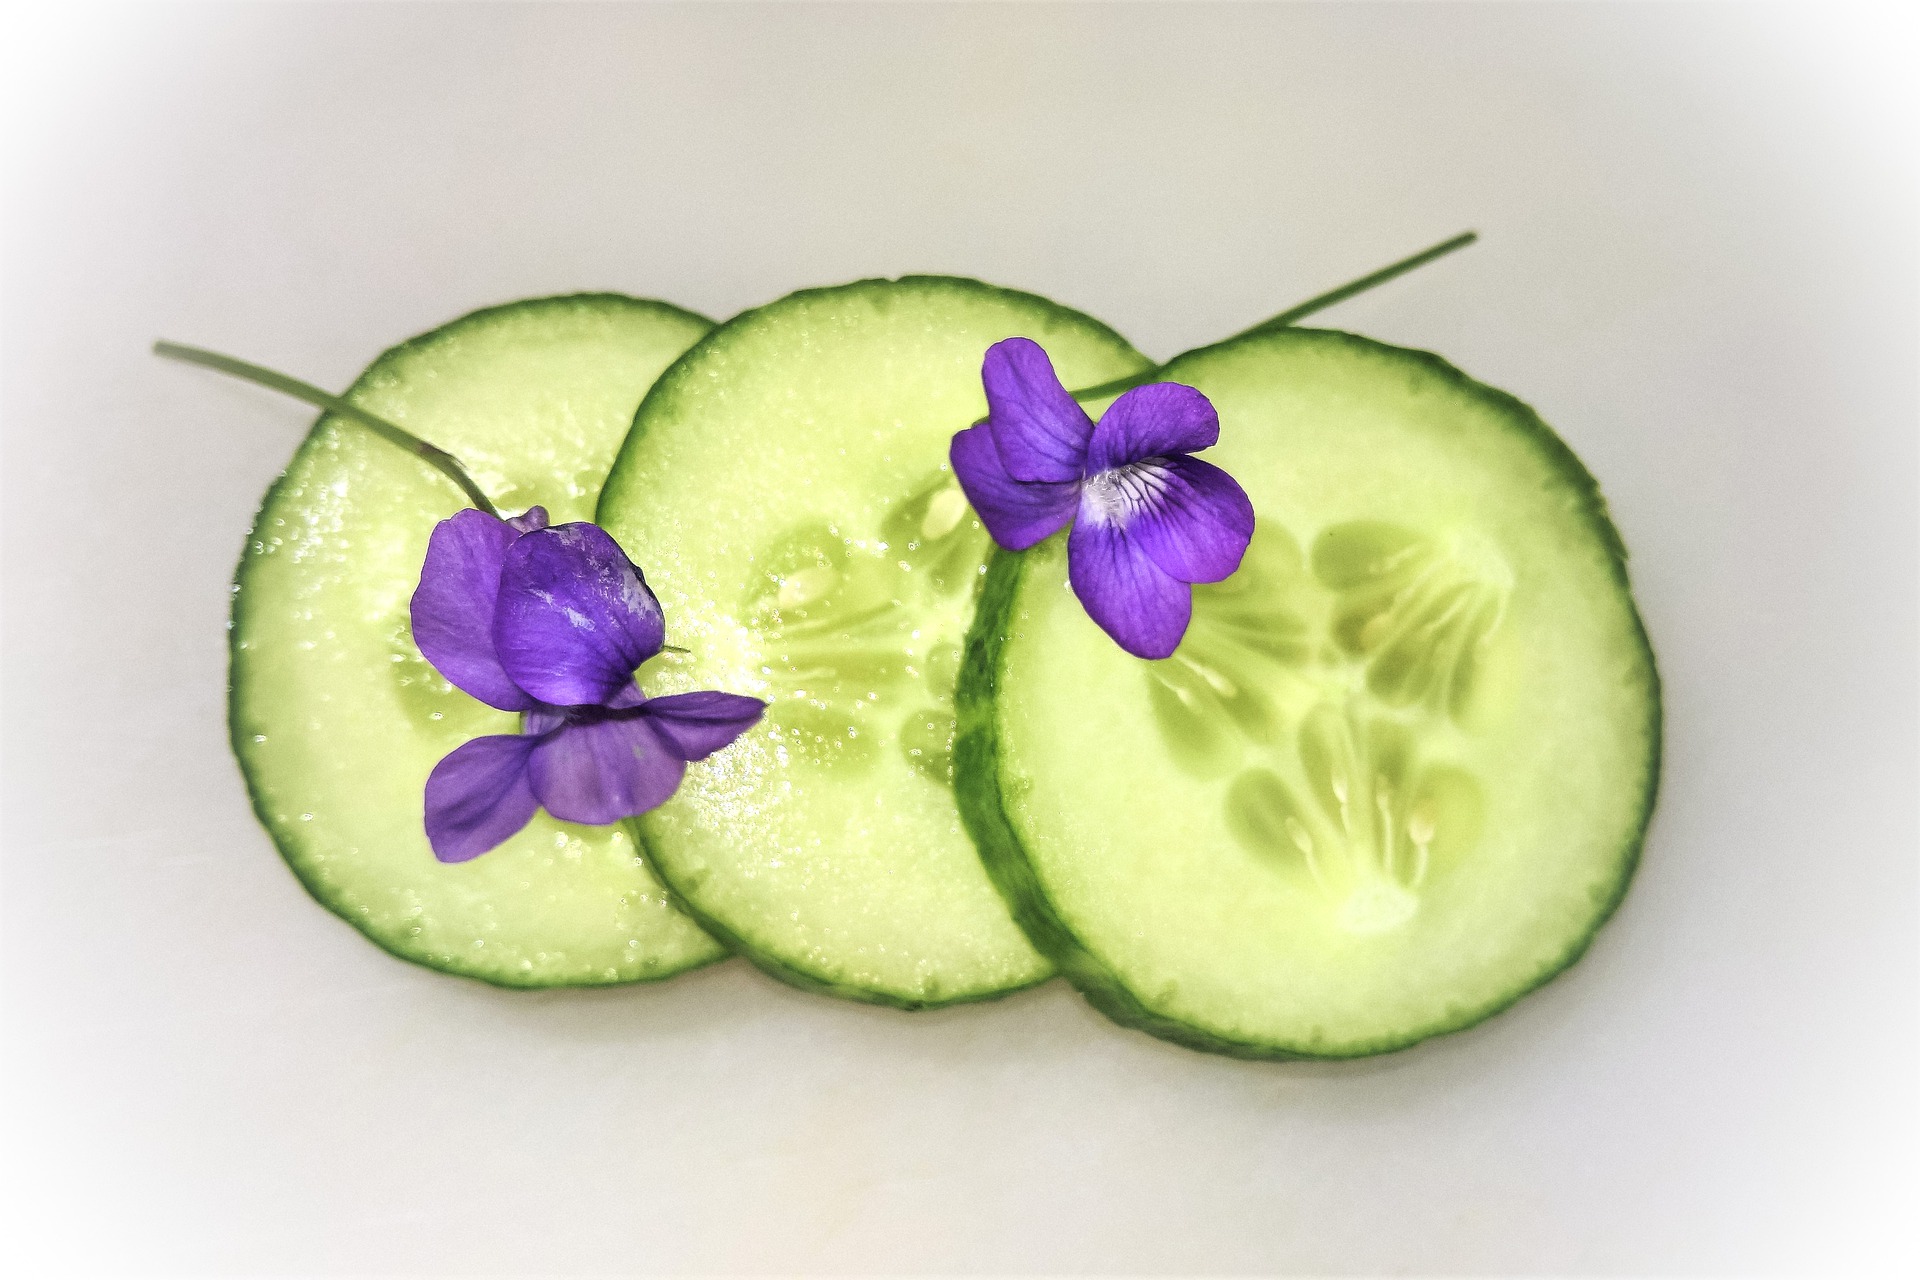 Swollen Under-Eyes? Try This Upgraded Cucumber Trick From An MD